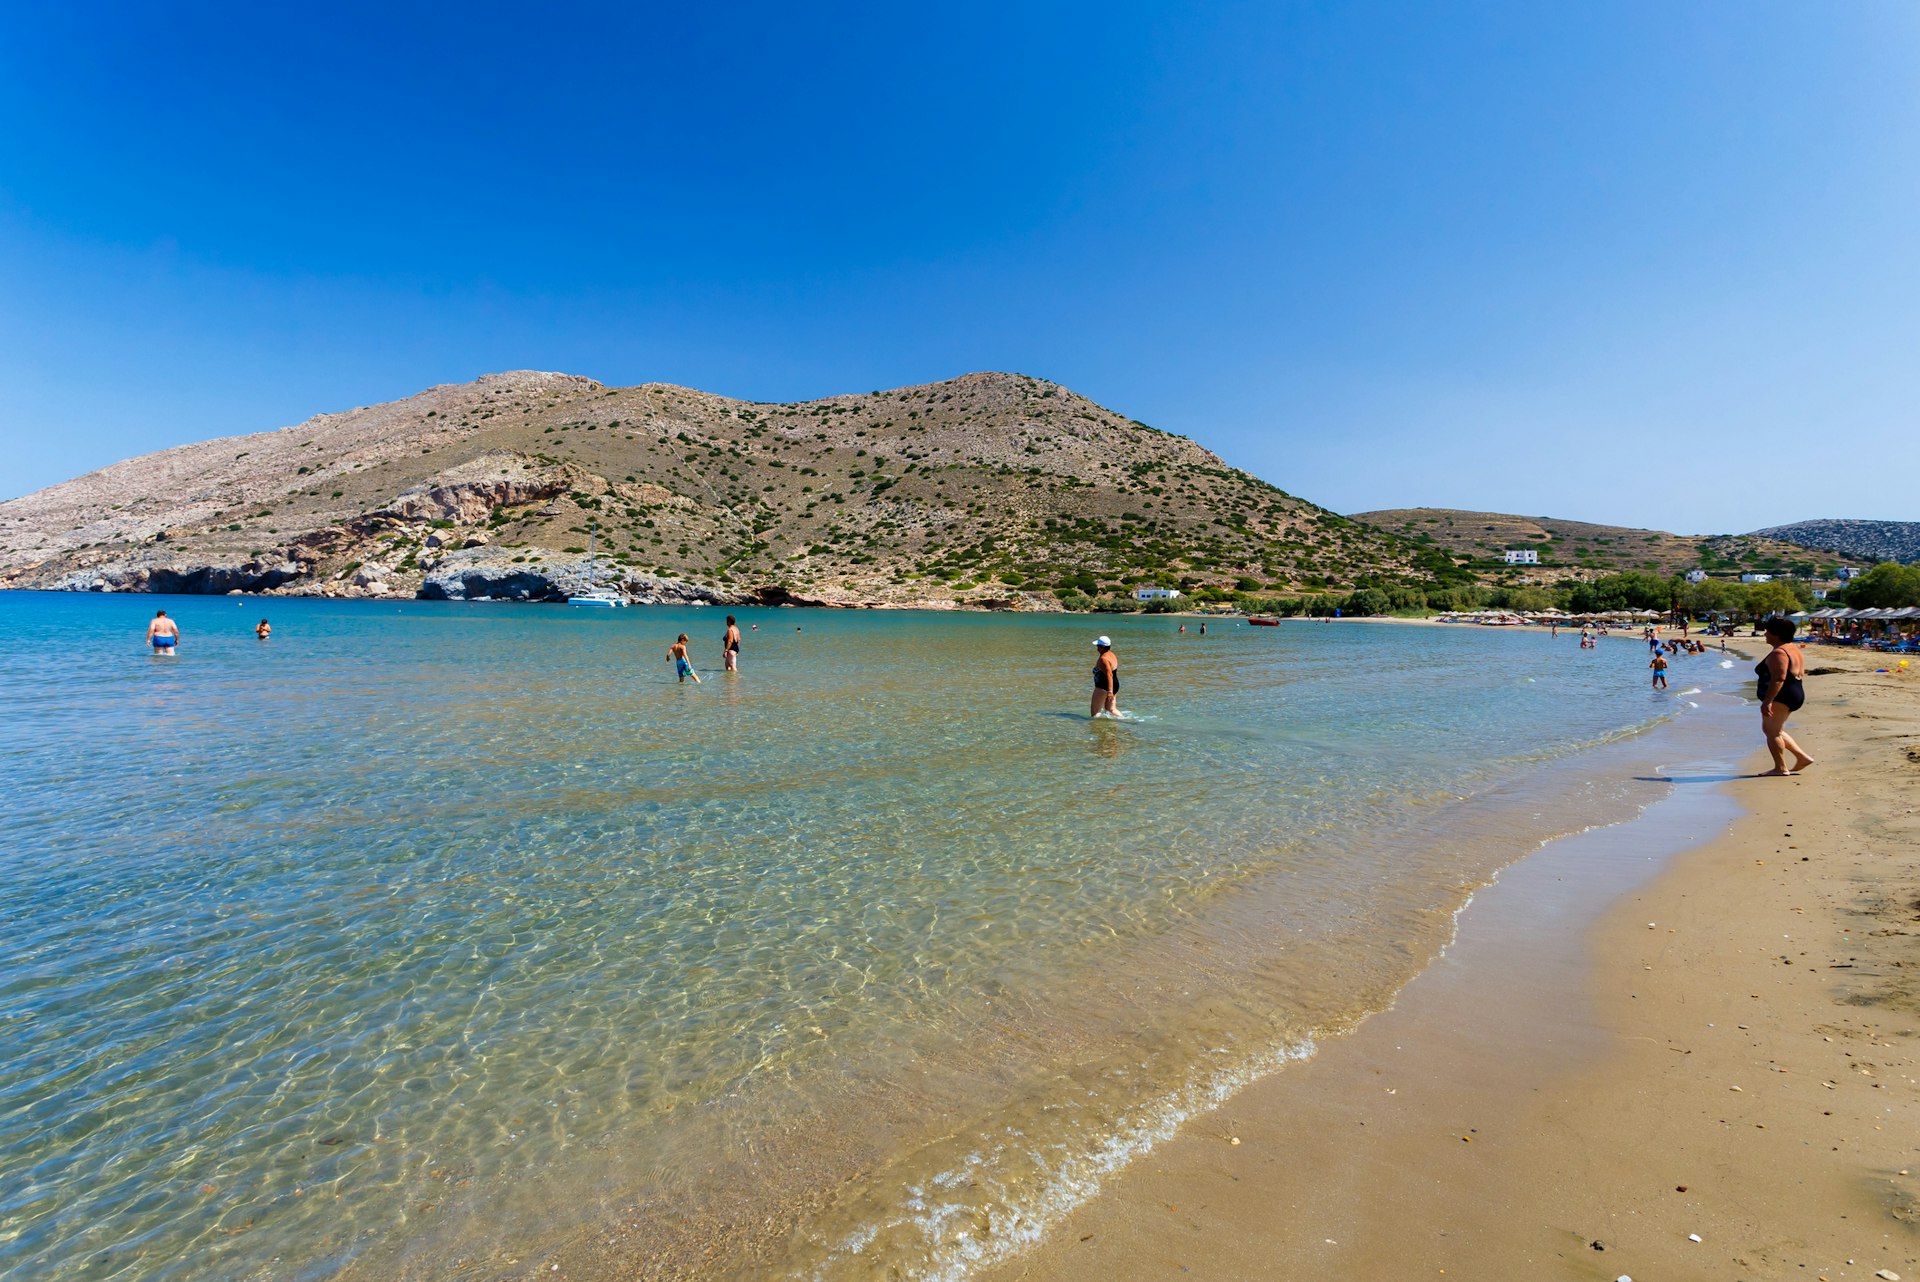 Beach of Galissas in Syros island, Greece against a clear blue sky. Galissas is one of the few sand beaches in Syros island